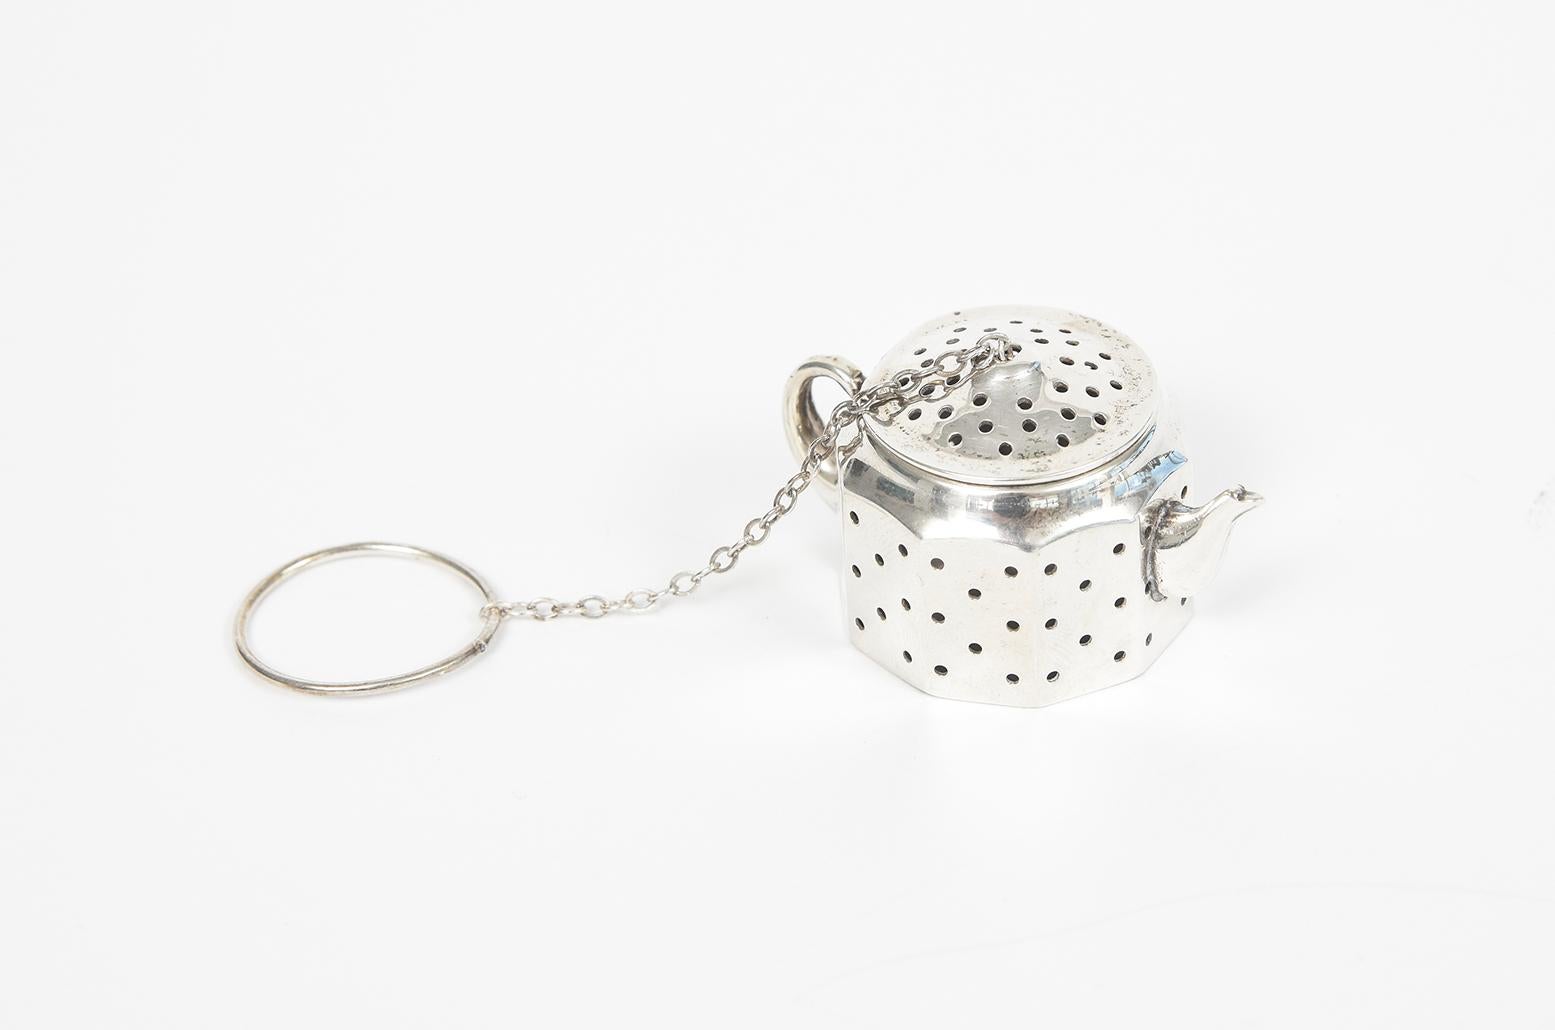 Vintage mid 20th century figural teapot sterling silver tea holder infuser with a hinged lid. It comes with its original chain Made by Amcraft Attleboro Mass which is a company that made sterling items for US military insignia items during WWI &